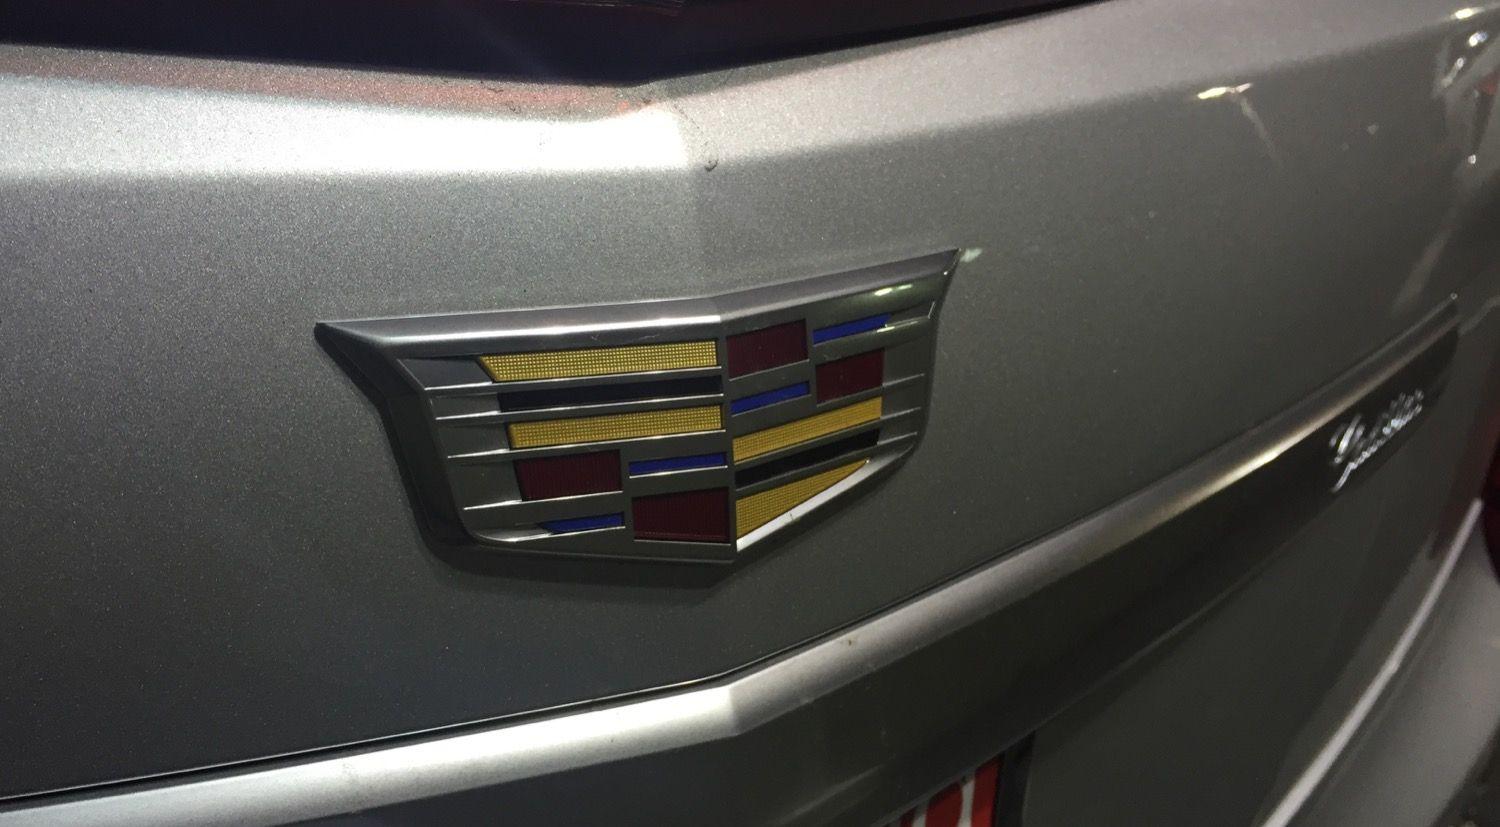 2016 New Cadillac Logo - The New Front Fascia Of The 2016 Cadillac XTS | GM Authority